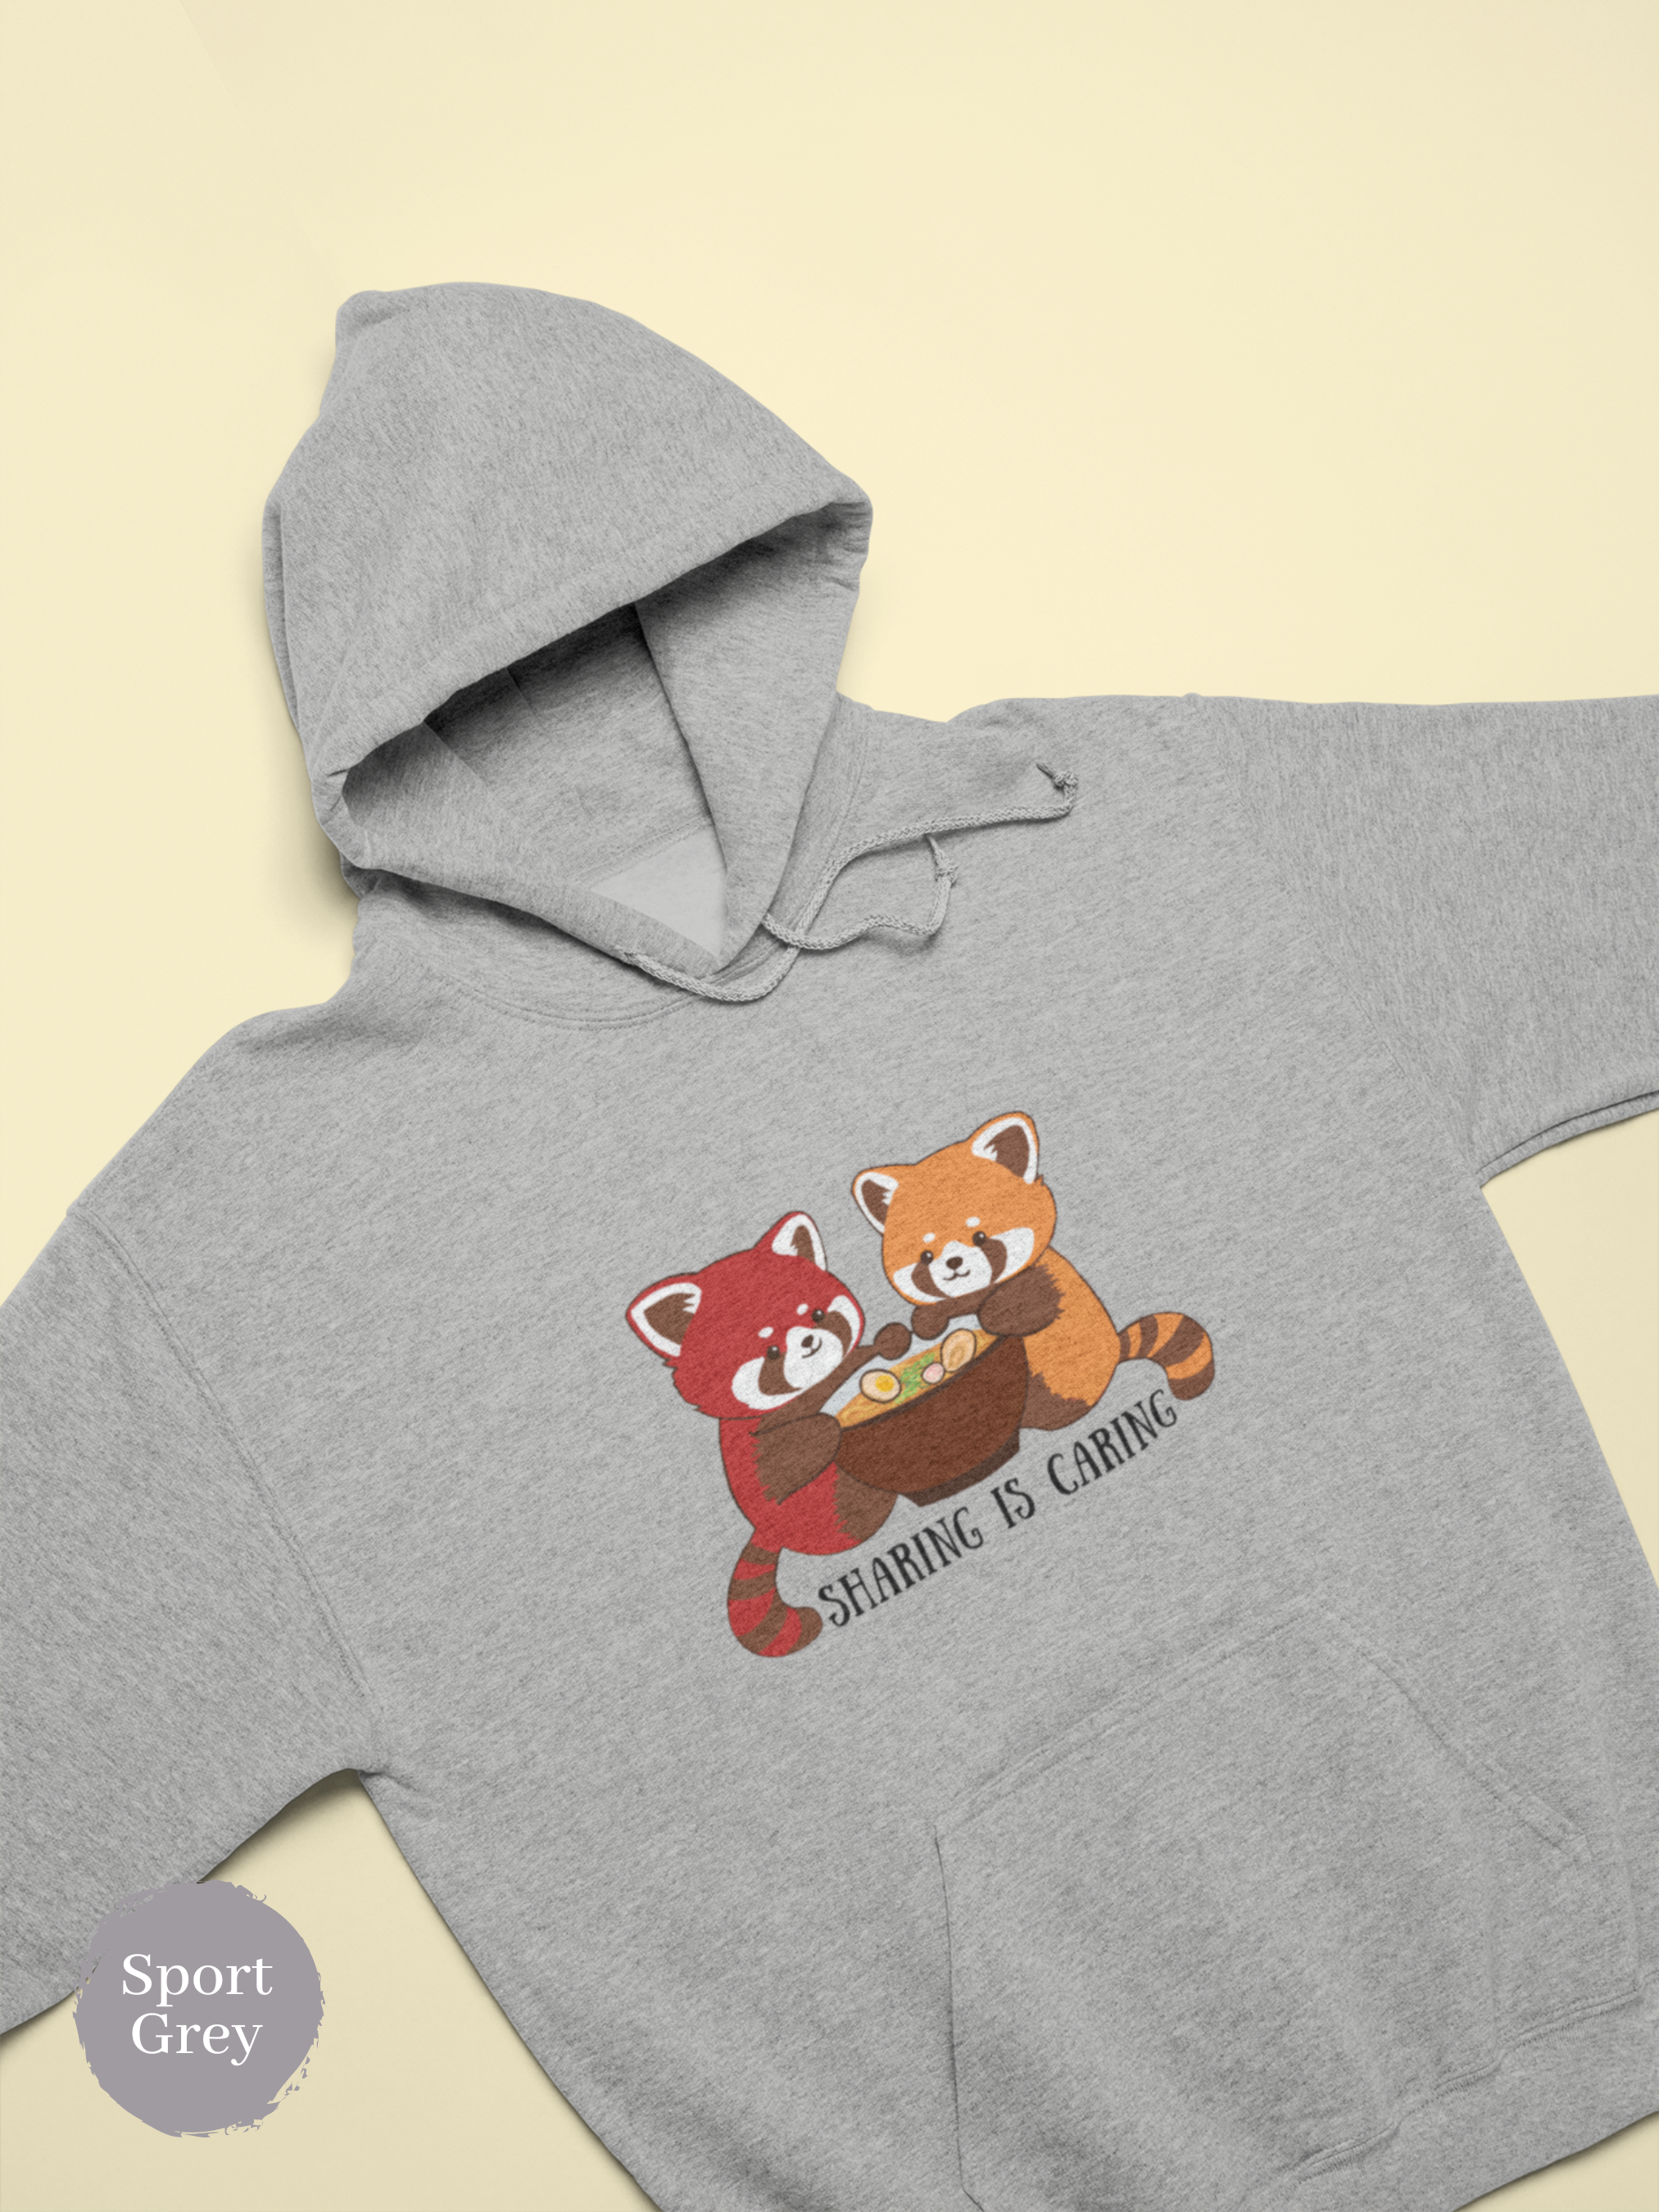 Ramen Hoodie: Sharing is Caring with Red Pandas, Delicious Asian Food Art, and Heartwarming Sentiment